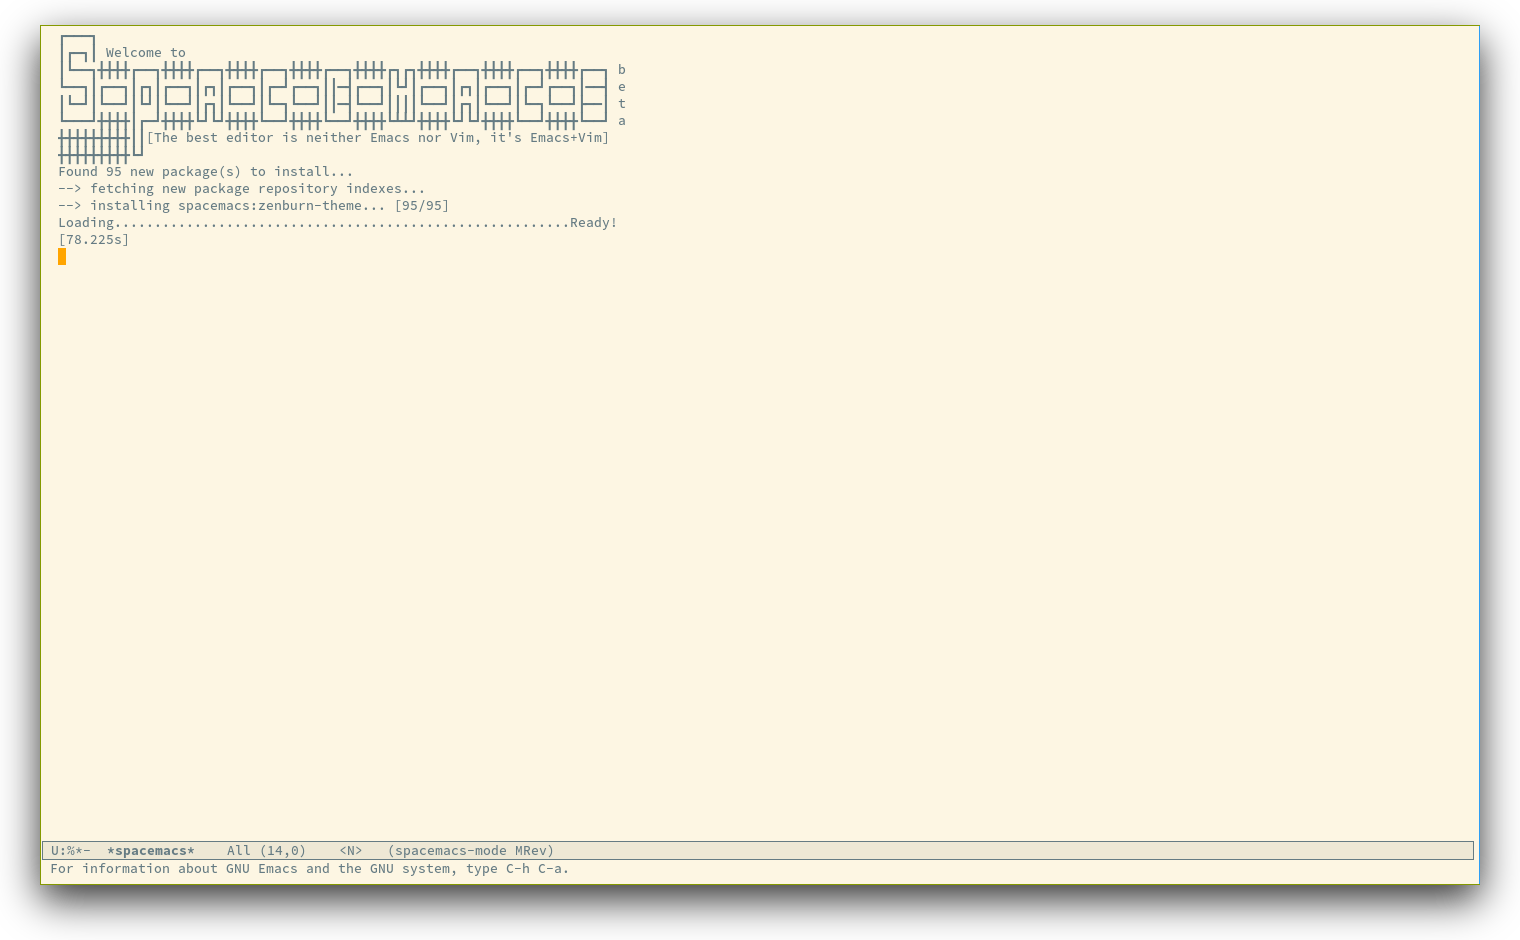 /TakeV/spacemacs/media/commit/8bf4f60e5afbd62ef6633fb70d02c8ddf7b1d12e/doc/img/spacemacs-startup.png